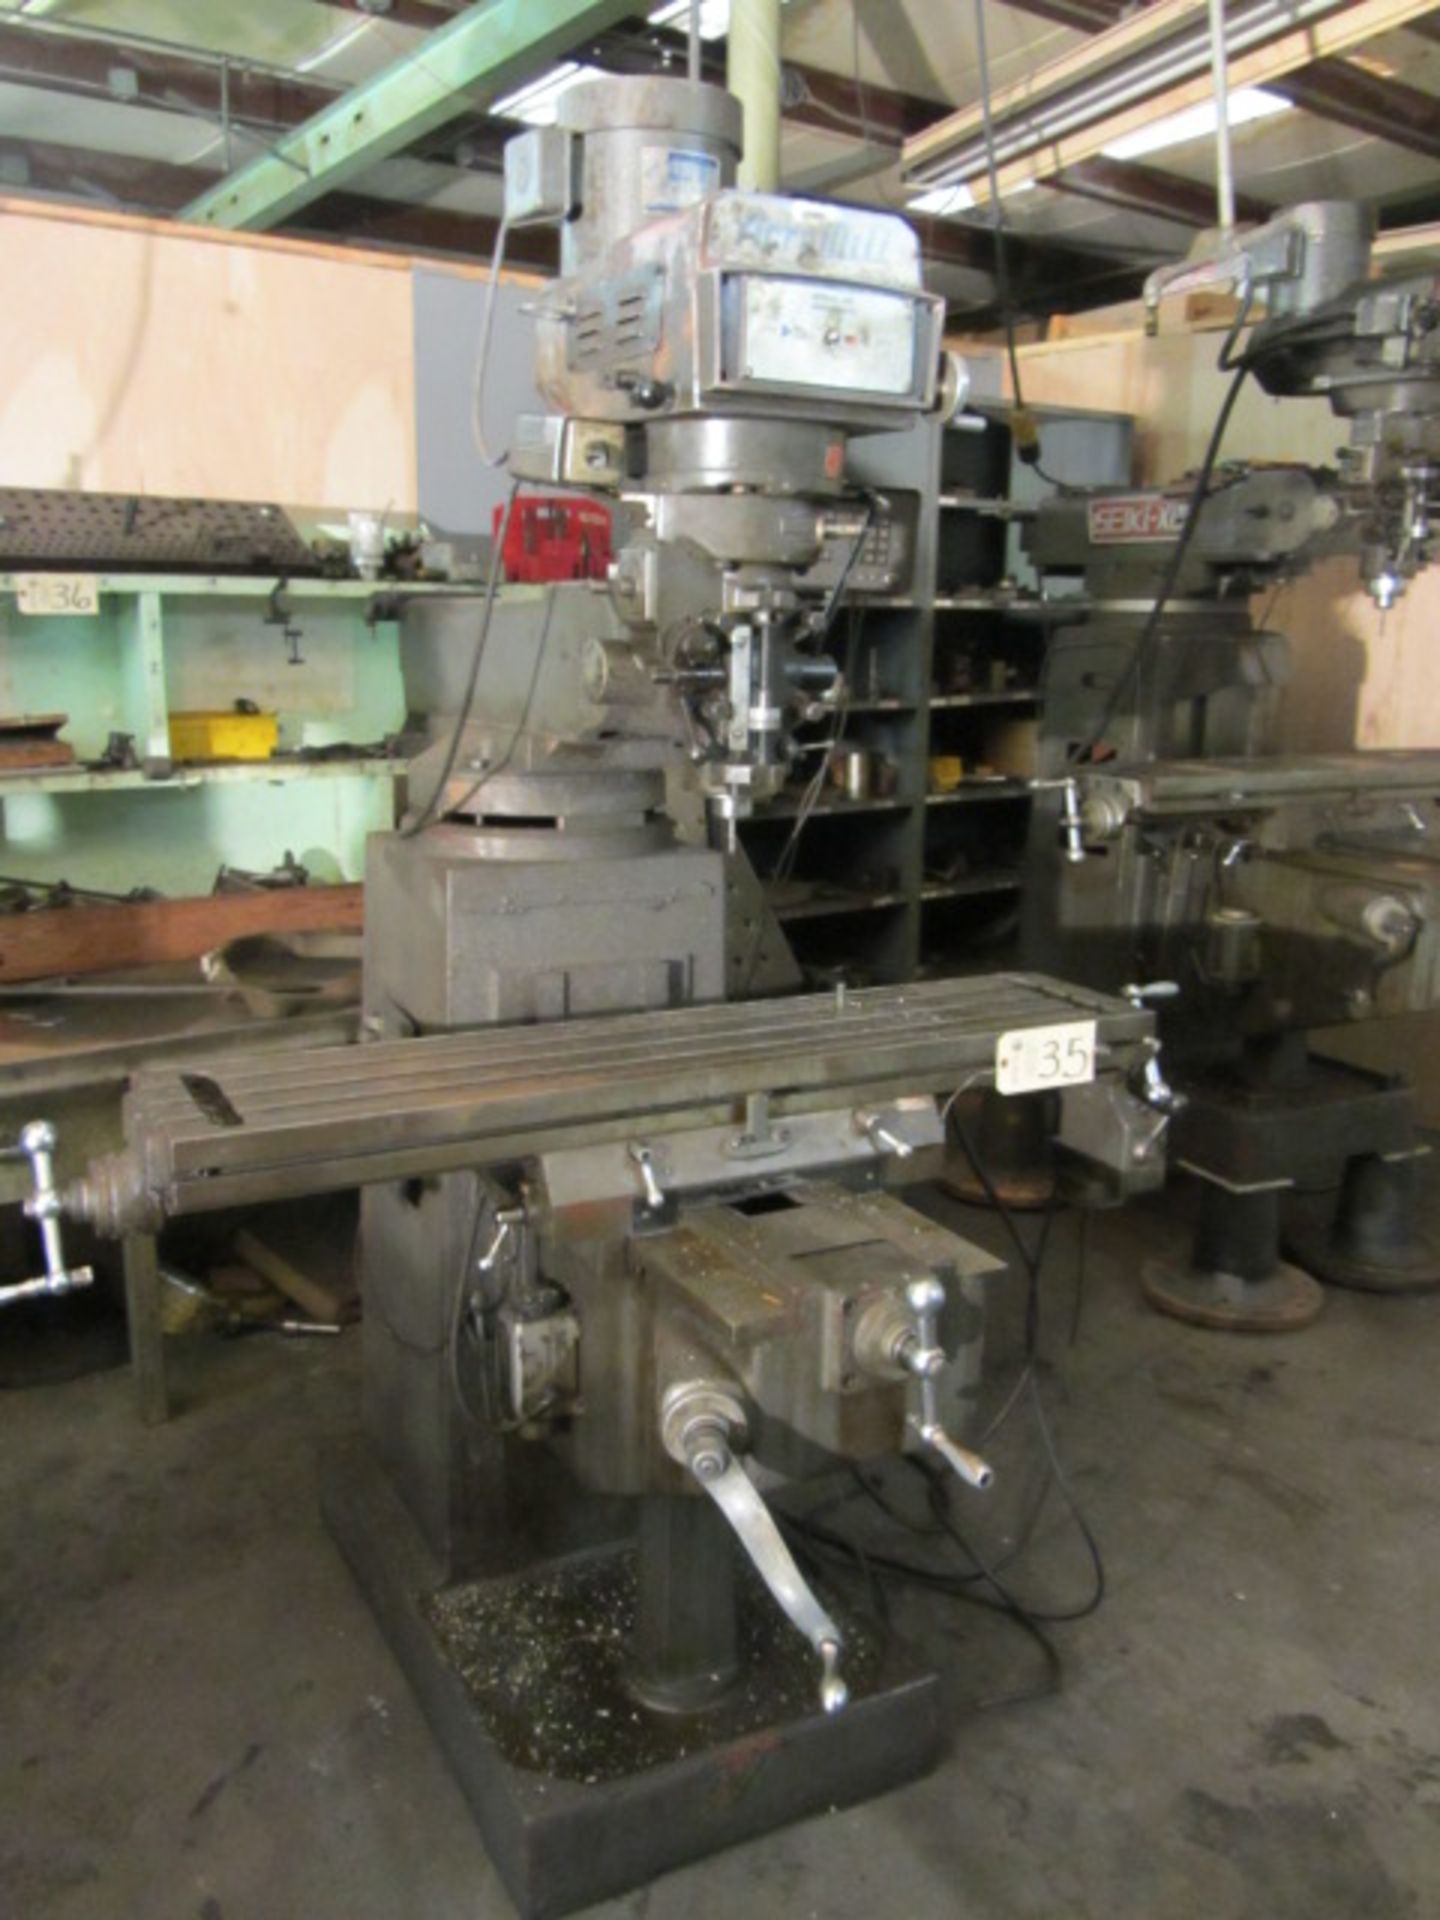 Acra Variable Speed Vertical Milling Machine with 10'' x 50'' Table, R-8 Variable Spindle Speeds